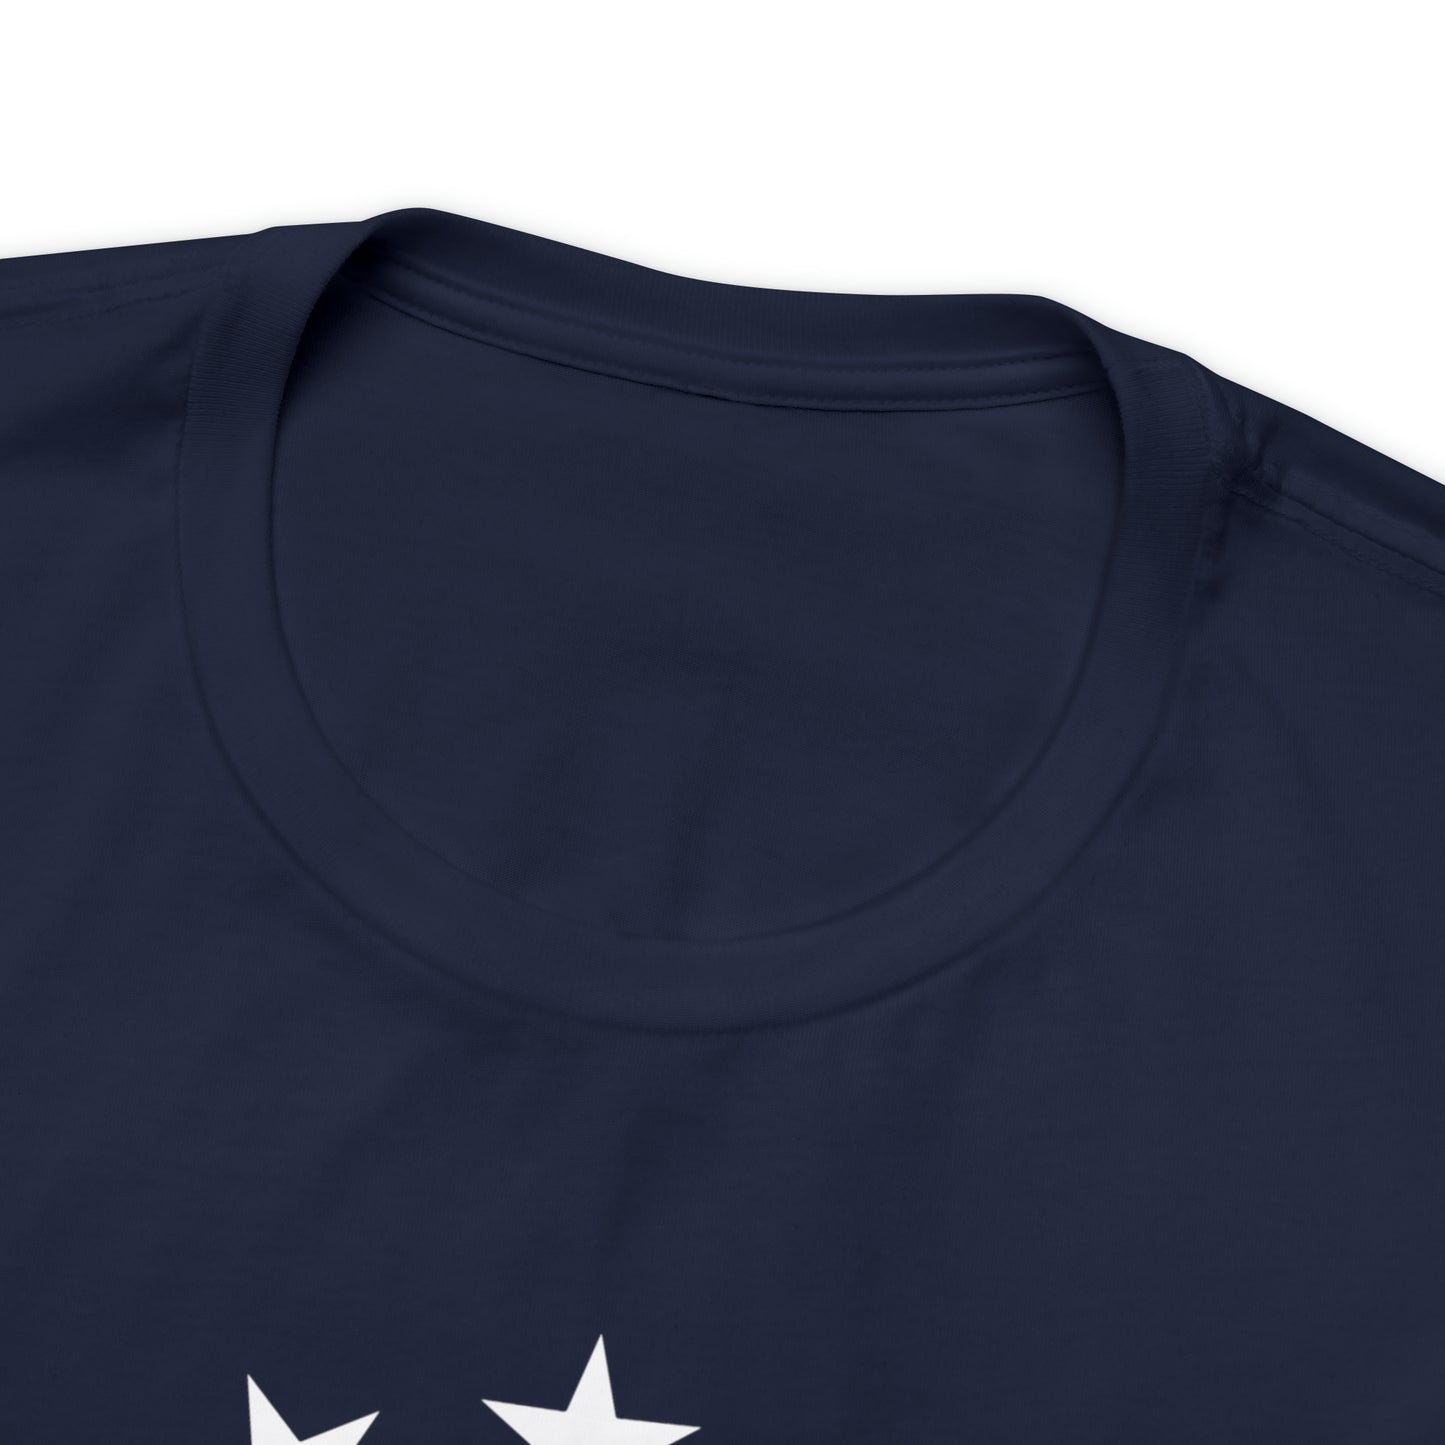 T-Shirt: 13-Star USA Peace Dove (center) + Be Part of the Solution (back)